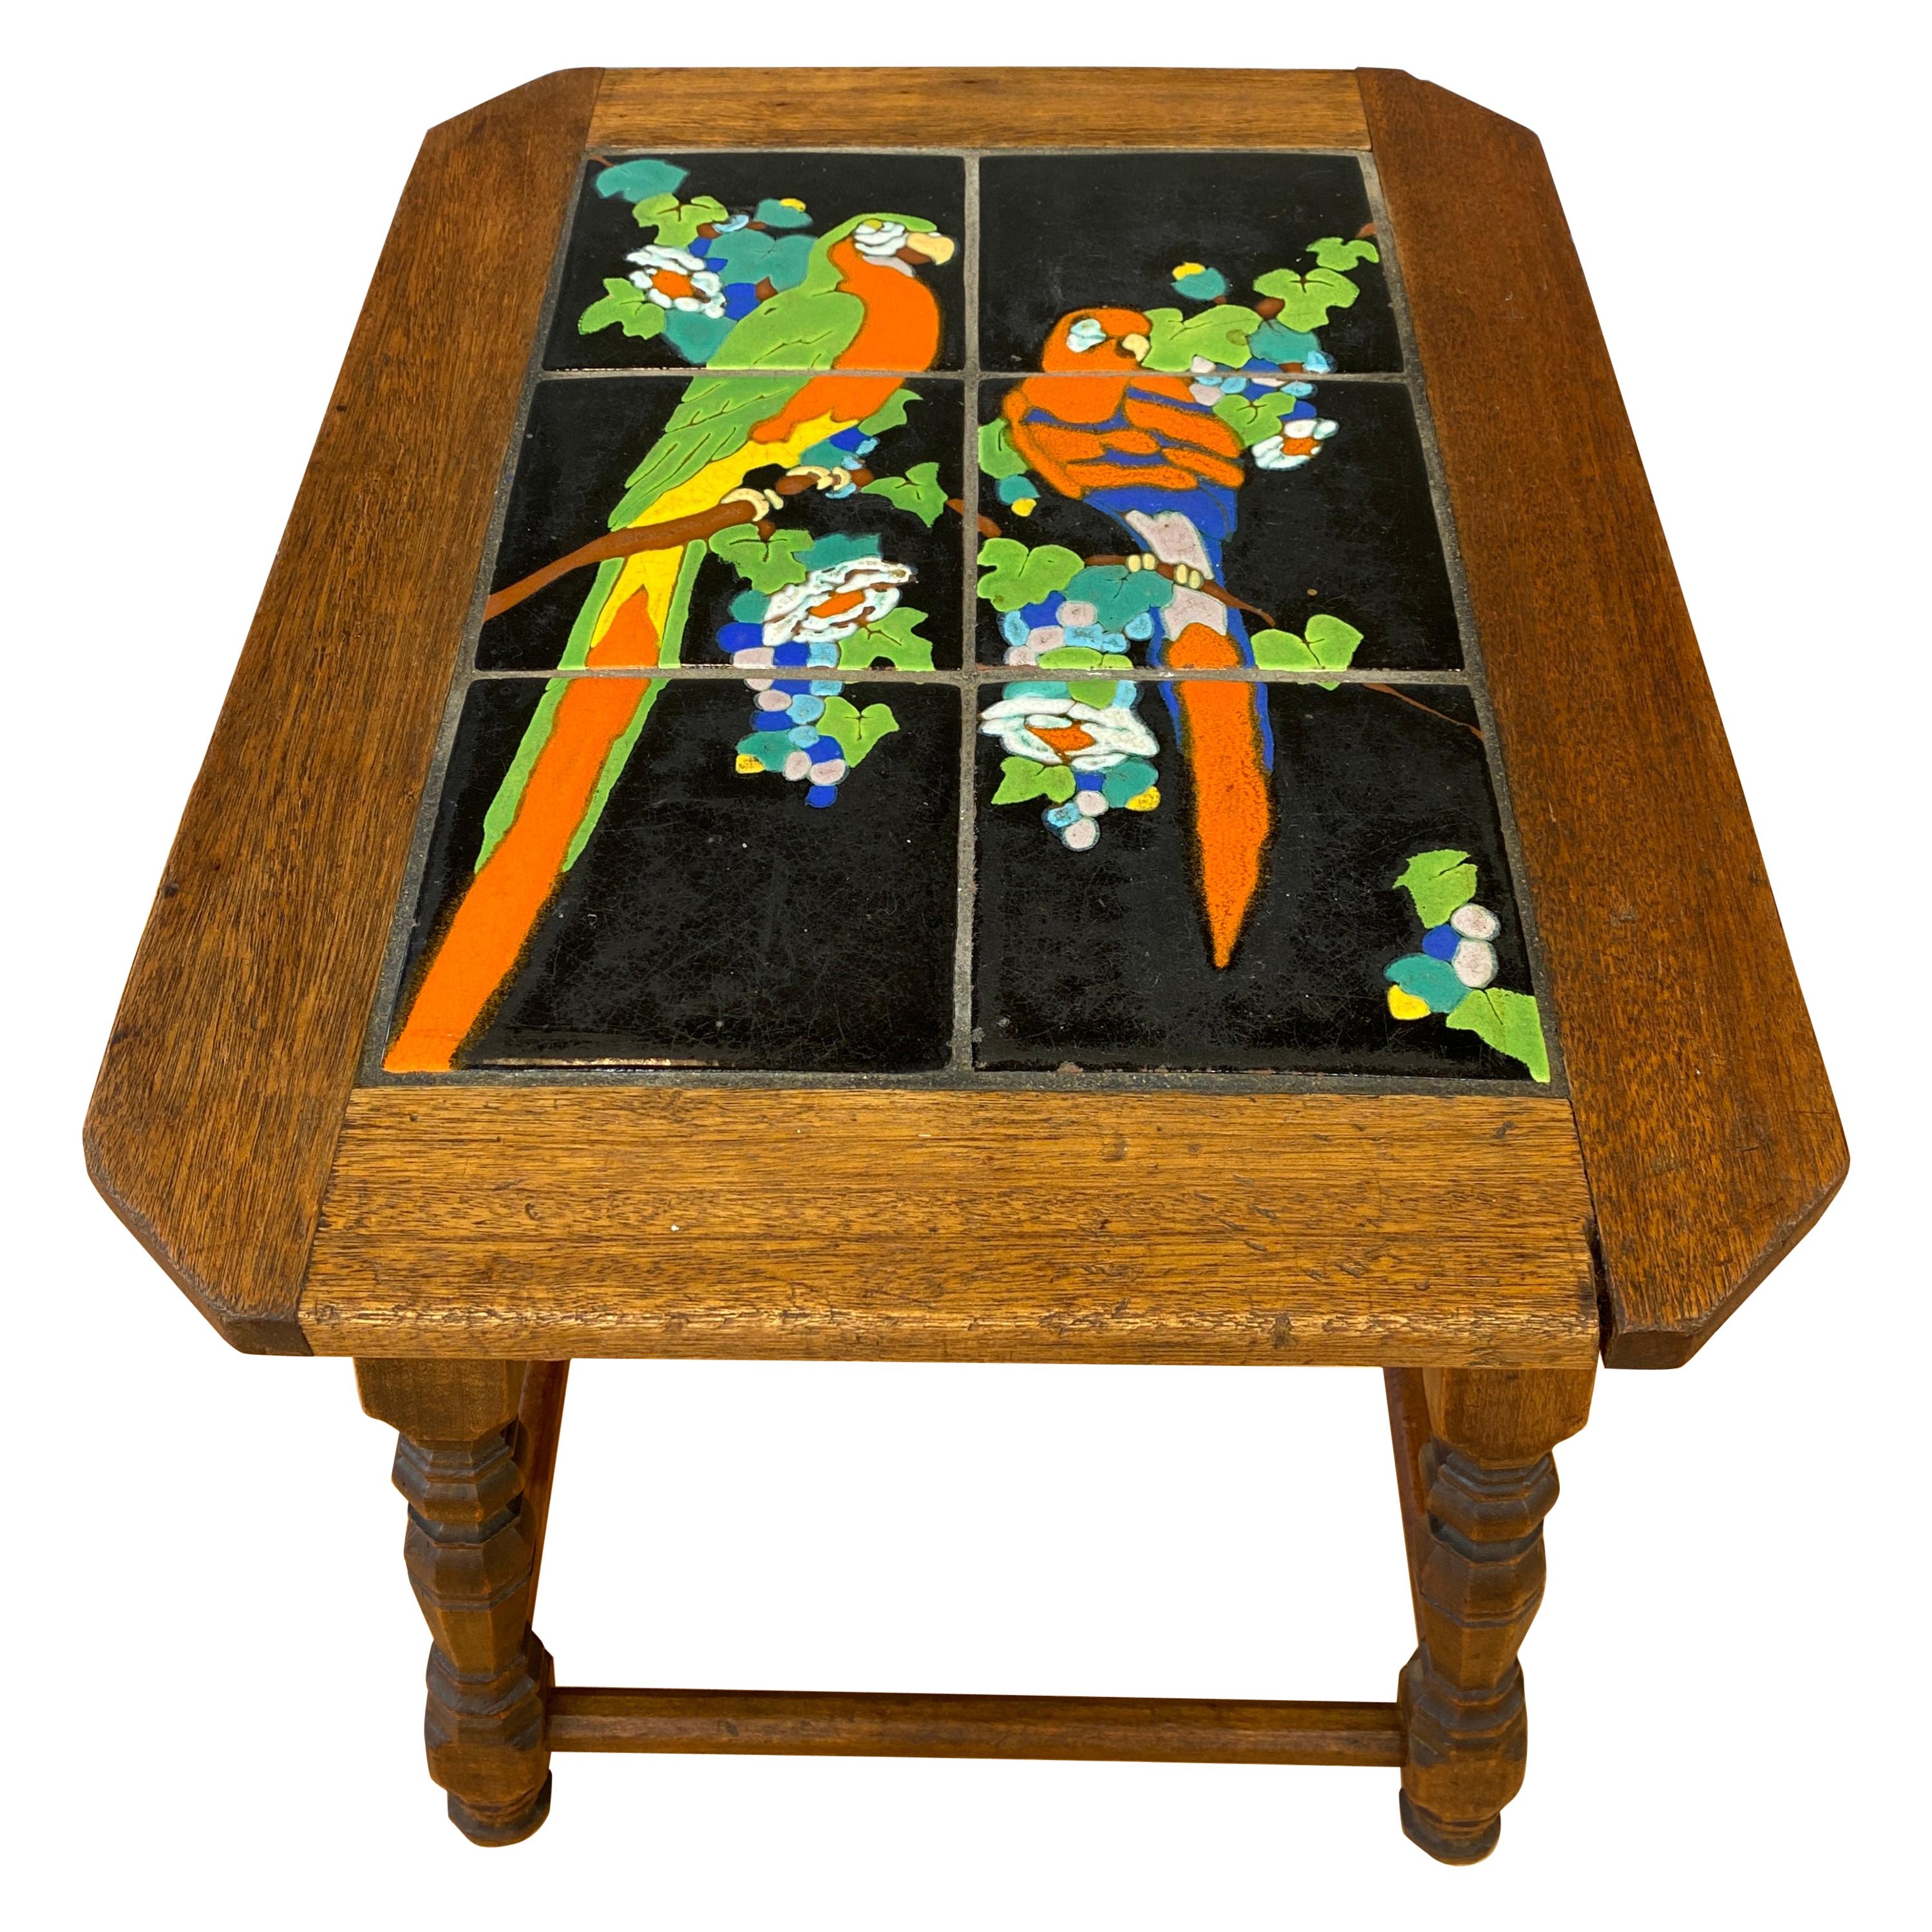 1920s-1930s Catalina Tile Mission Table with Parrots